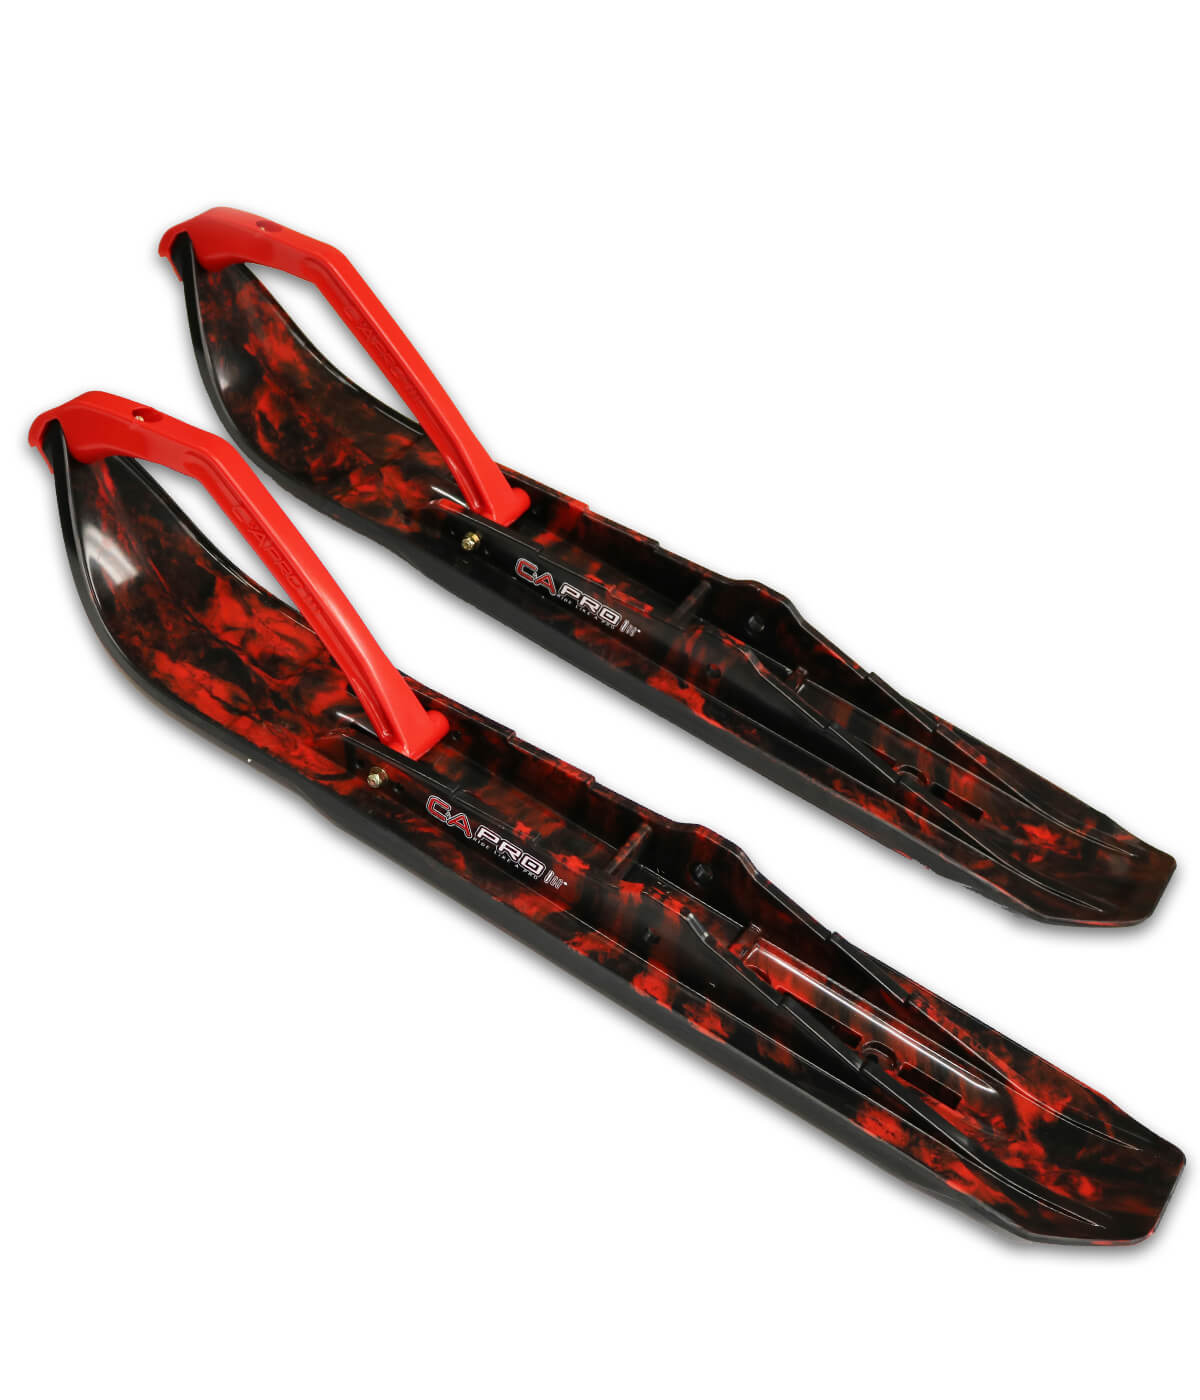 Black XCS skis with Red accent and Red handles